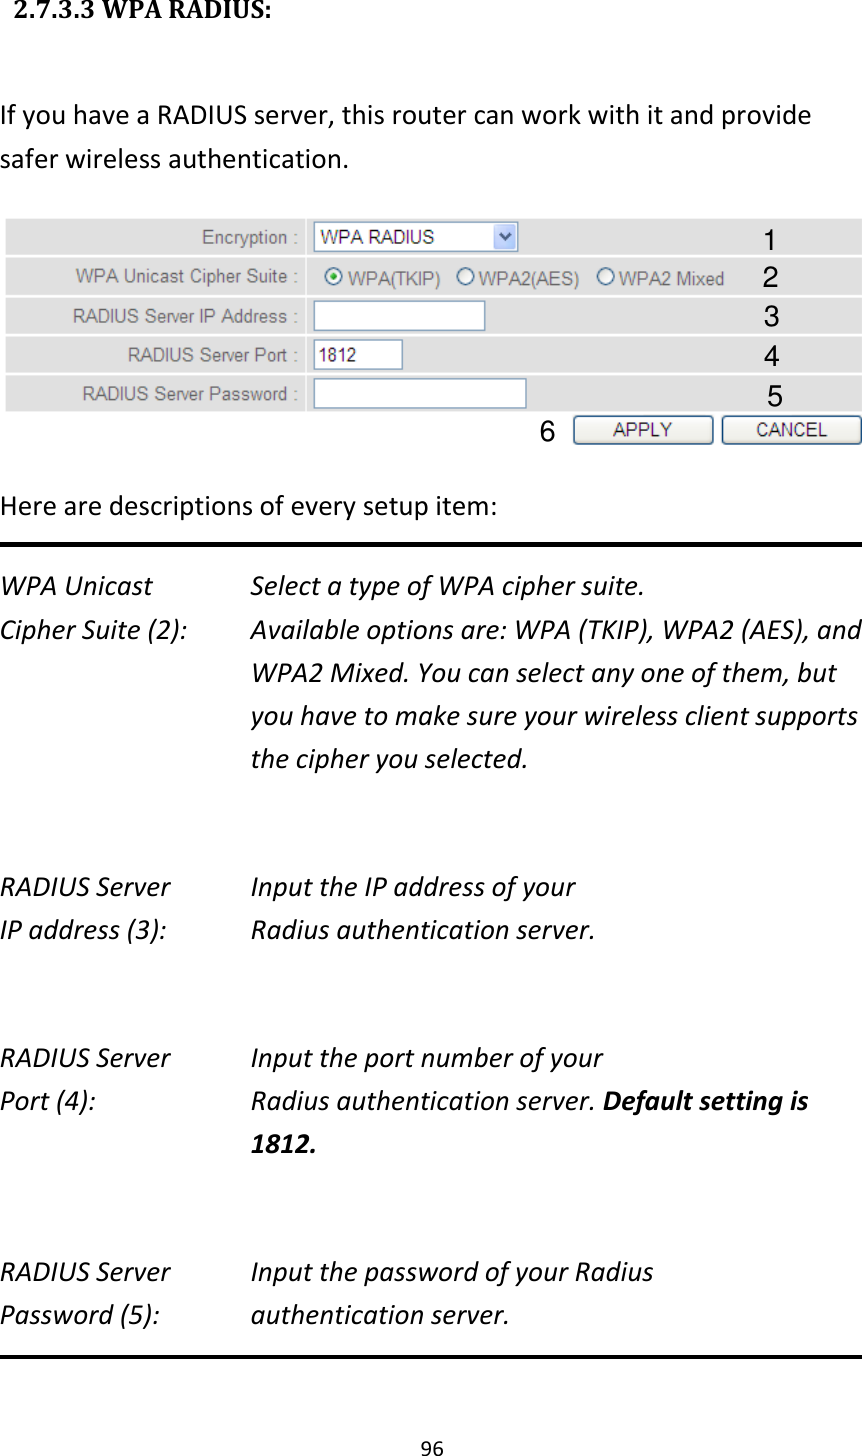 96   2.7.3.3 WPA RADIUS:  If you have a RADIUS server, this router can work with it and provide safer wireless authentication.  Here are descriptions of every setup item: WPA Unicast      Select a type of WPA cipher suite. Cipher Suite (2):  Available options are: WPA (TKIP), WPA2 (AES), and WPA2 Mixed. You can select any one of them, but you have to make sure your wireless client supports the cipher you selected.  RADIUS Server      Input the IP address of your IP address (3):      Radius authentication server.  RADIUS Server      Input the port number of your Port (4):    Radius authentication server. Default setting is 1812.  RADIUS Server      Input the password of your Radius Password (5):    authentication server.  1 3 4 2 5 6 